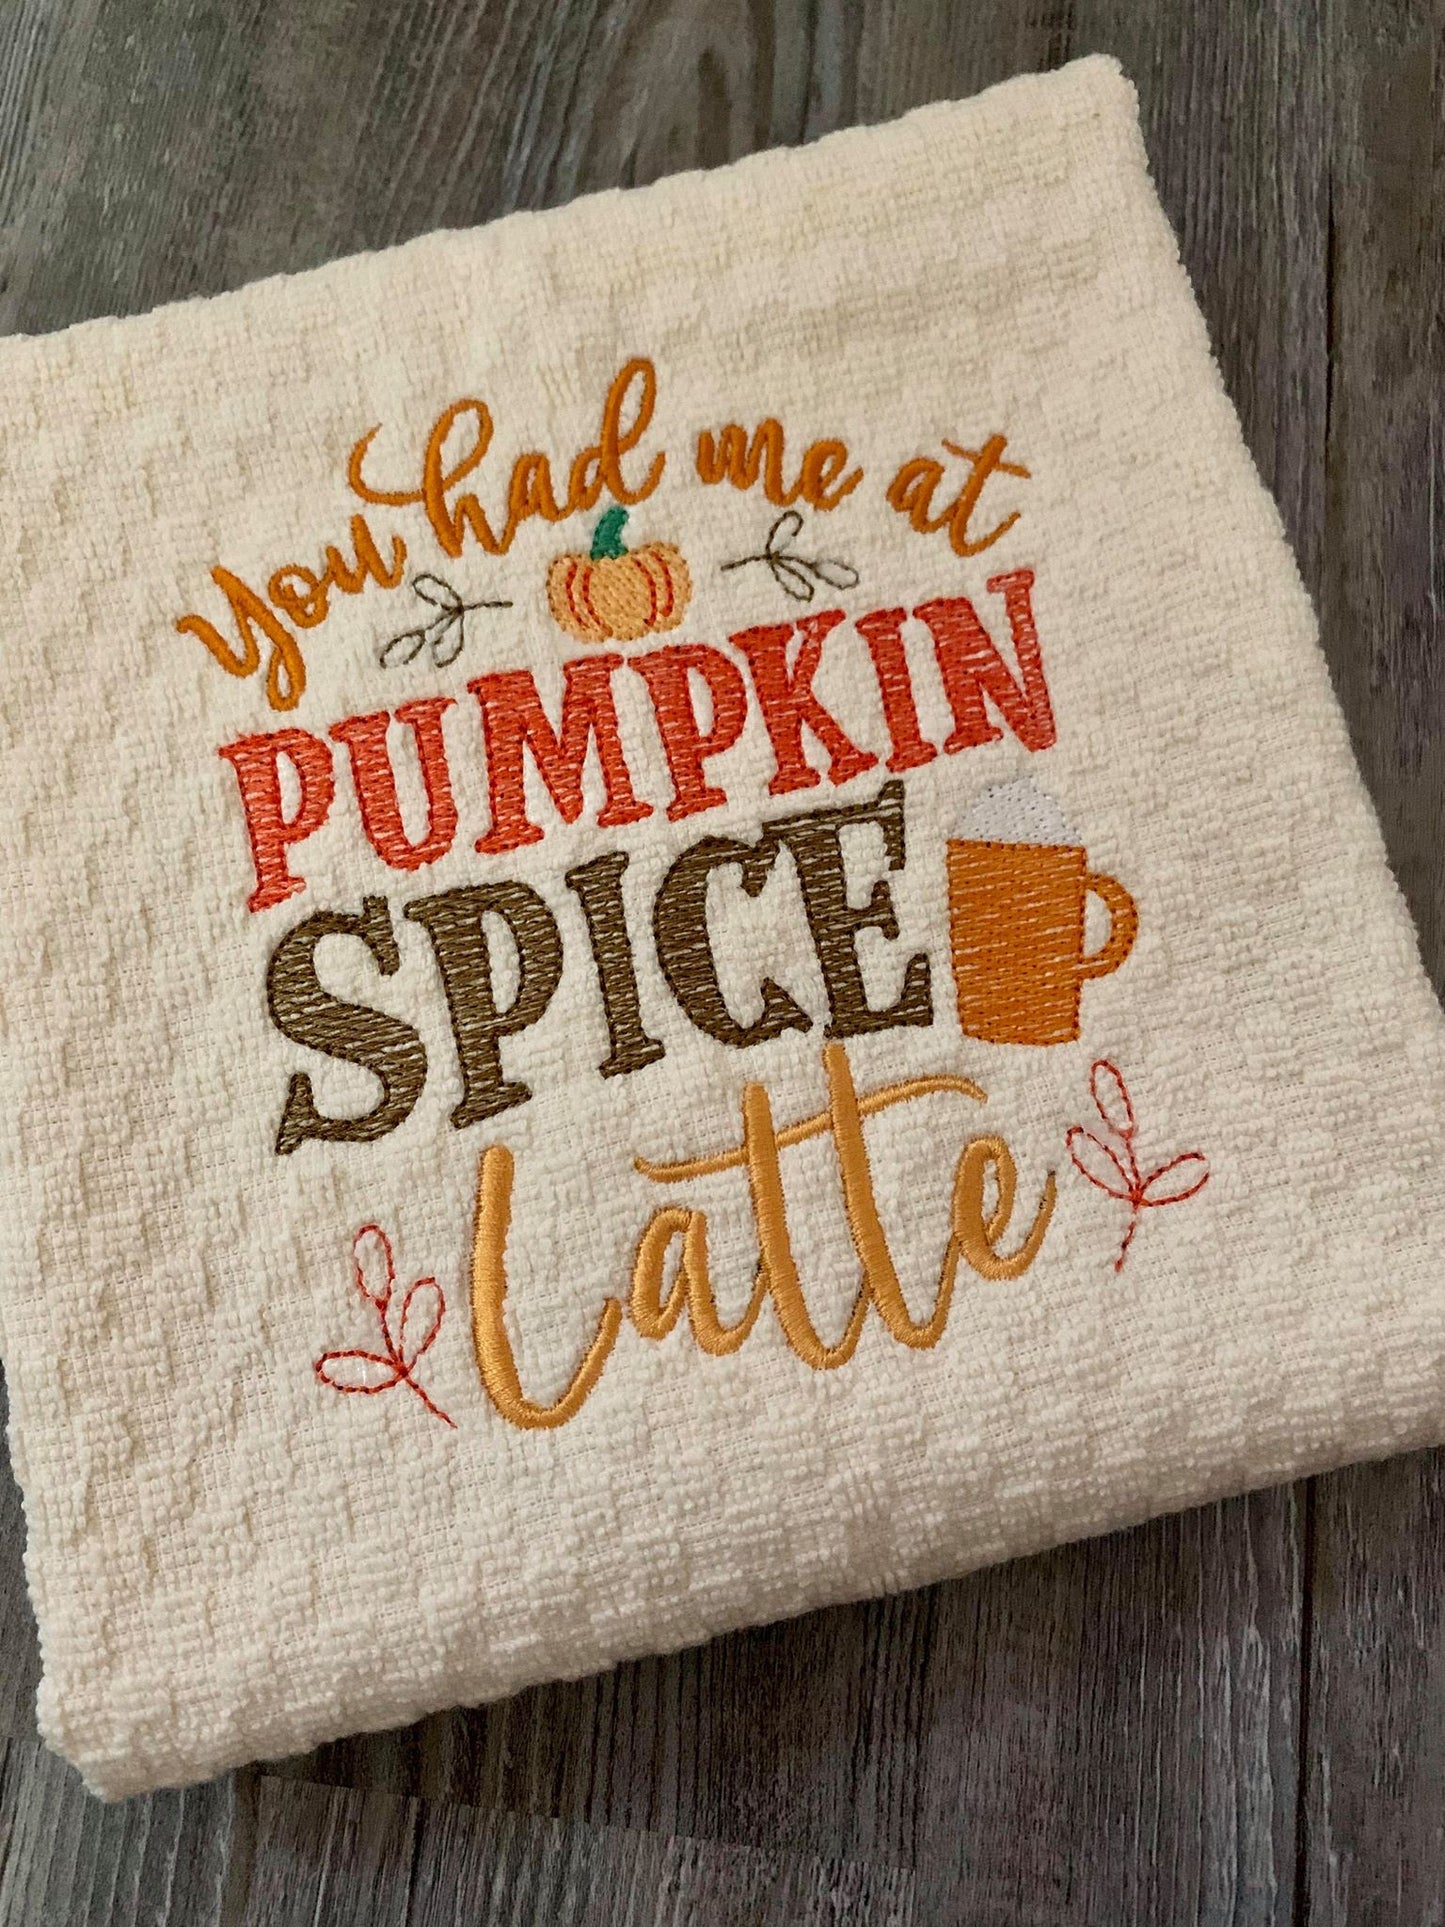 You Had Me At Pumpkin Spice Latte - 2 Sizes - Digital Embroidery Design